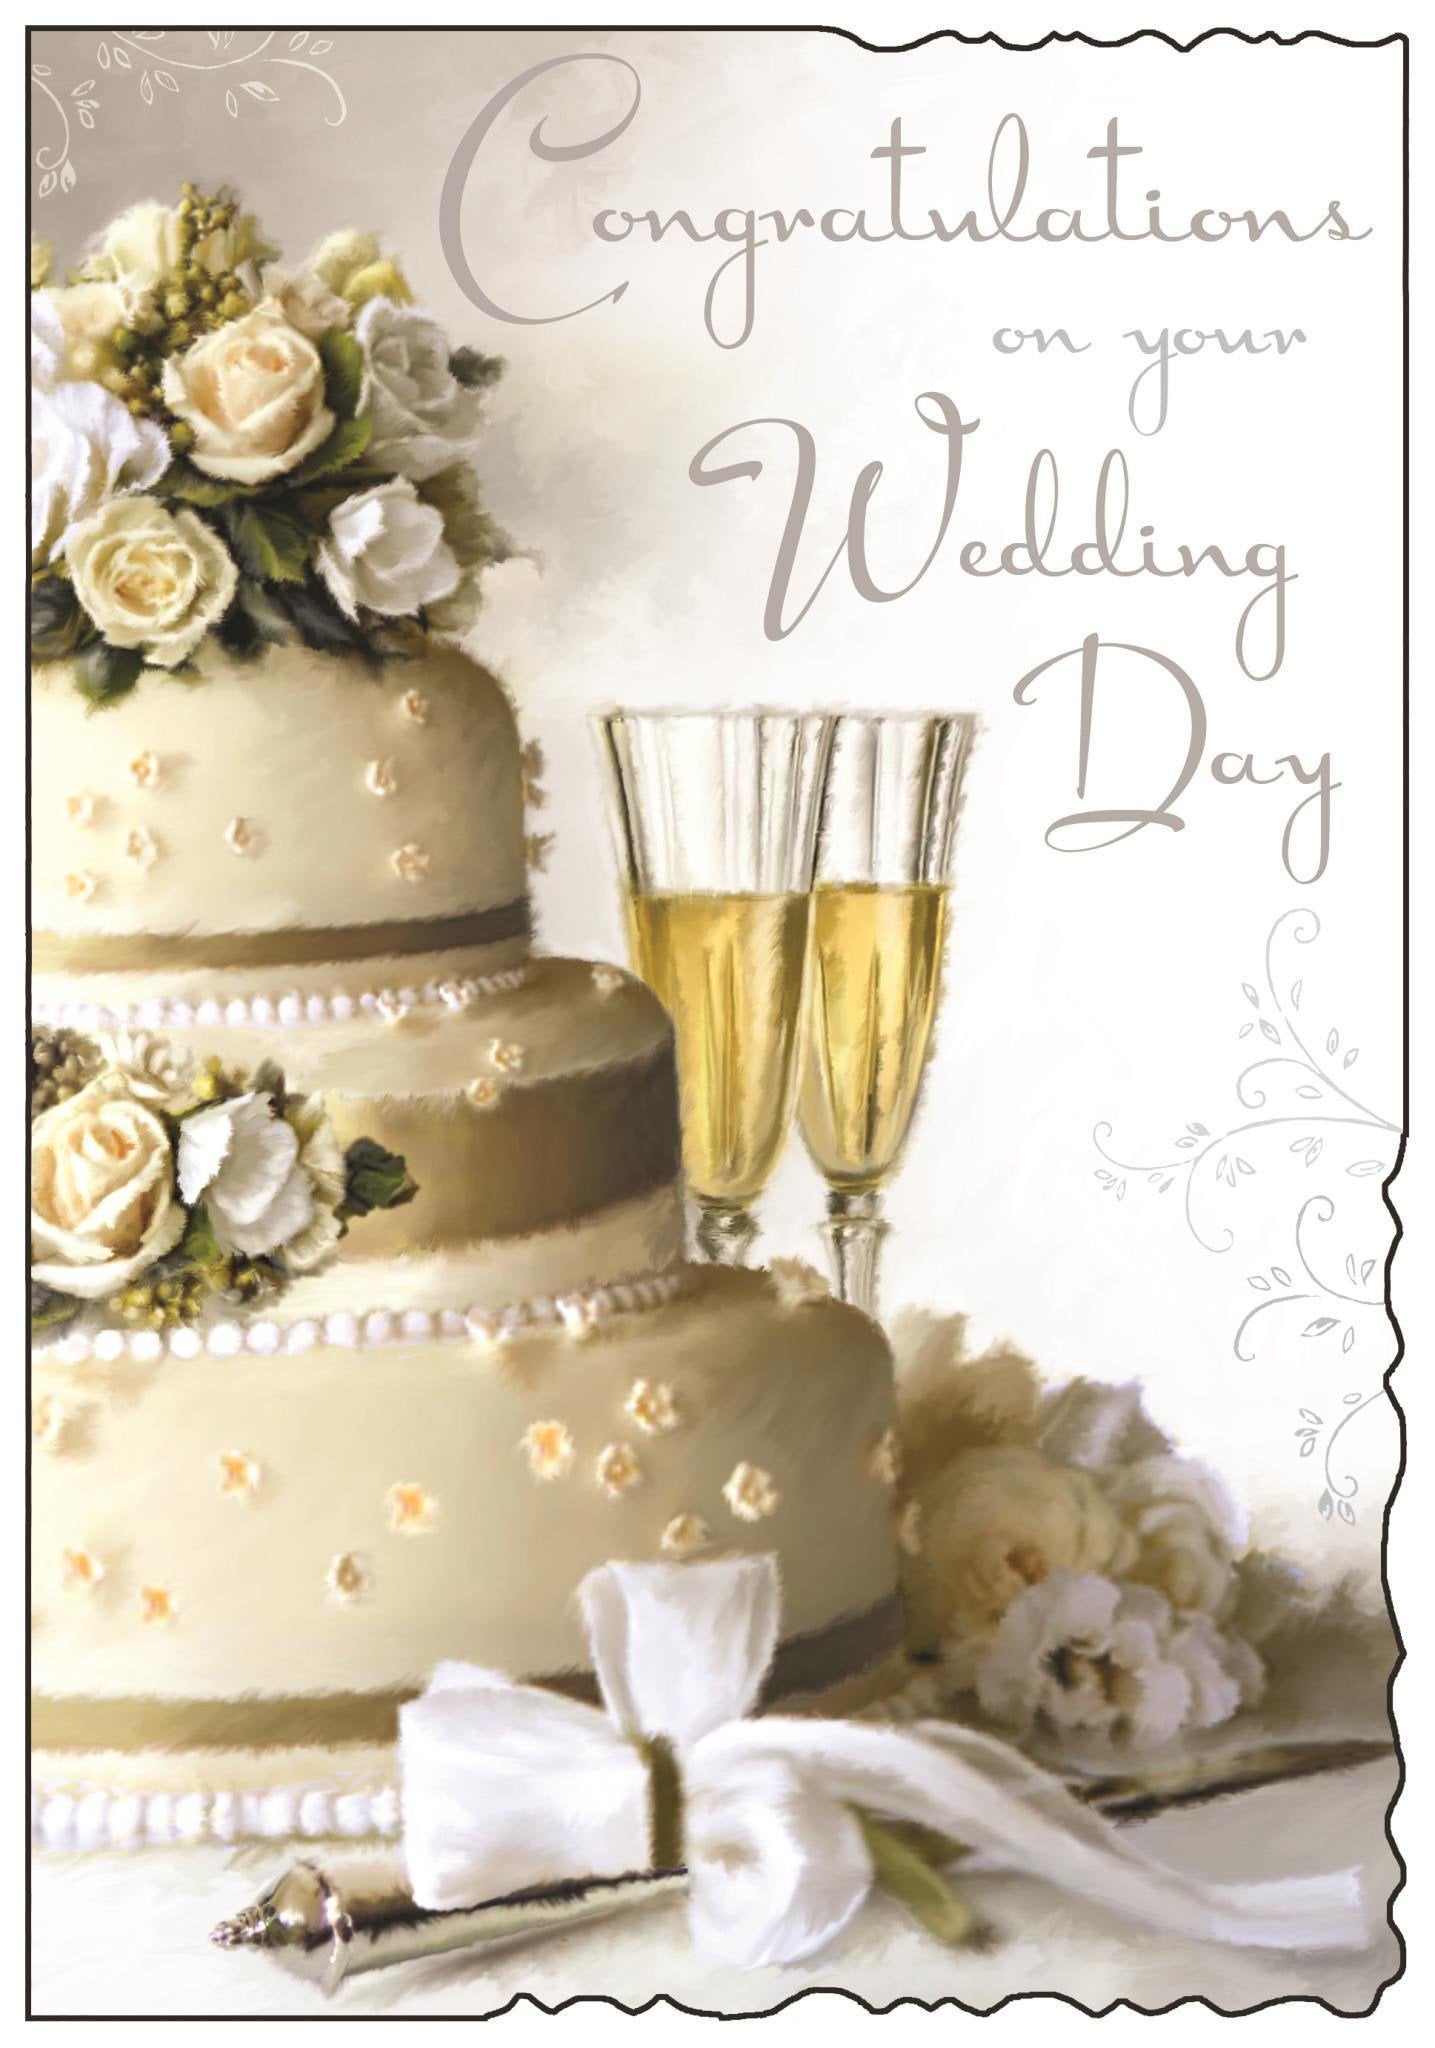 Front of Wedding Day Cake Greetings Card